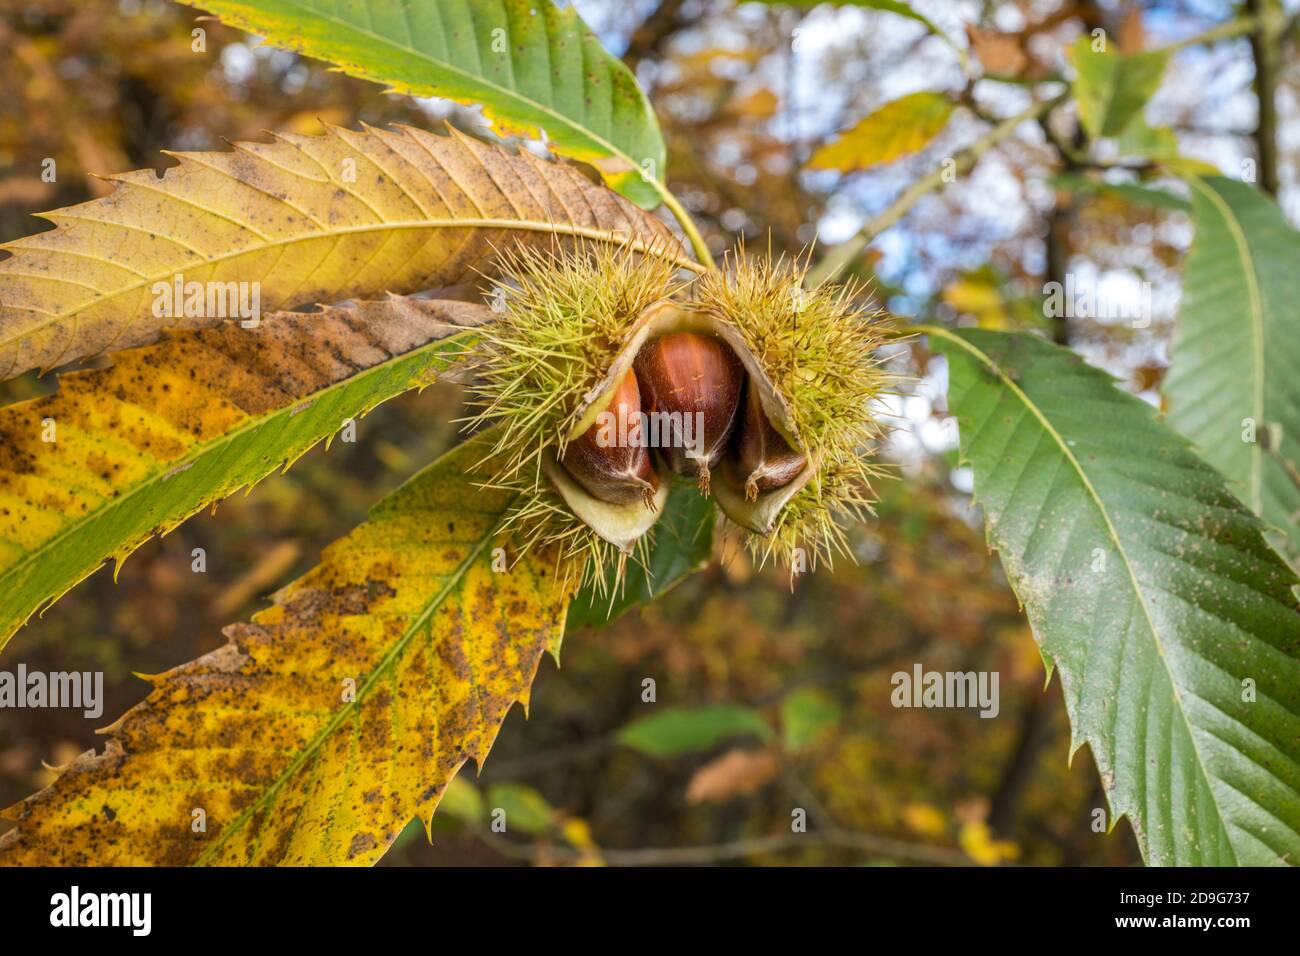 Sweet Chestnuts in their prickly outer protection. Stock Photo